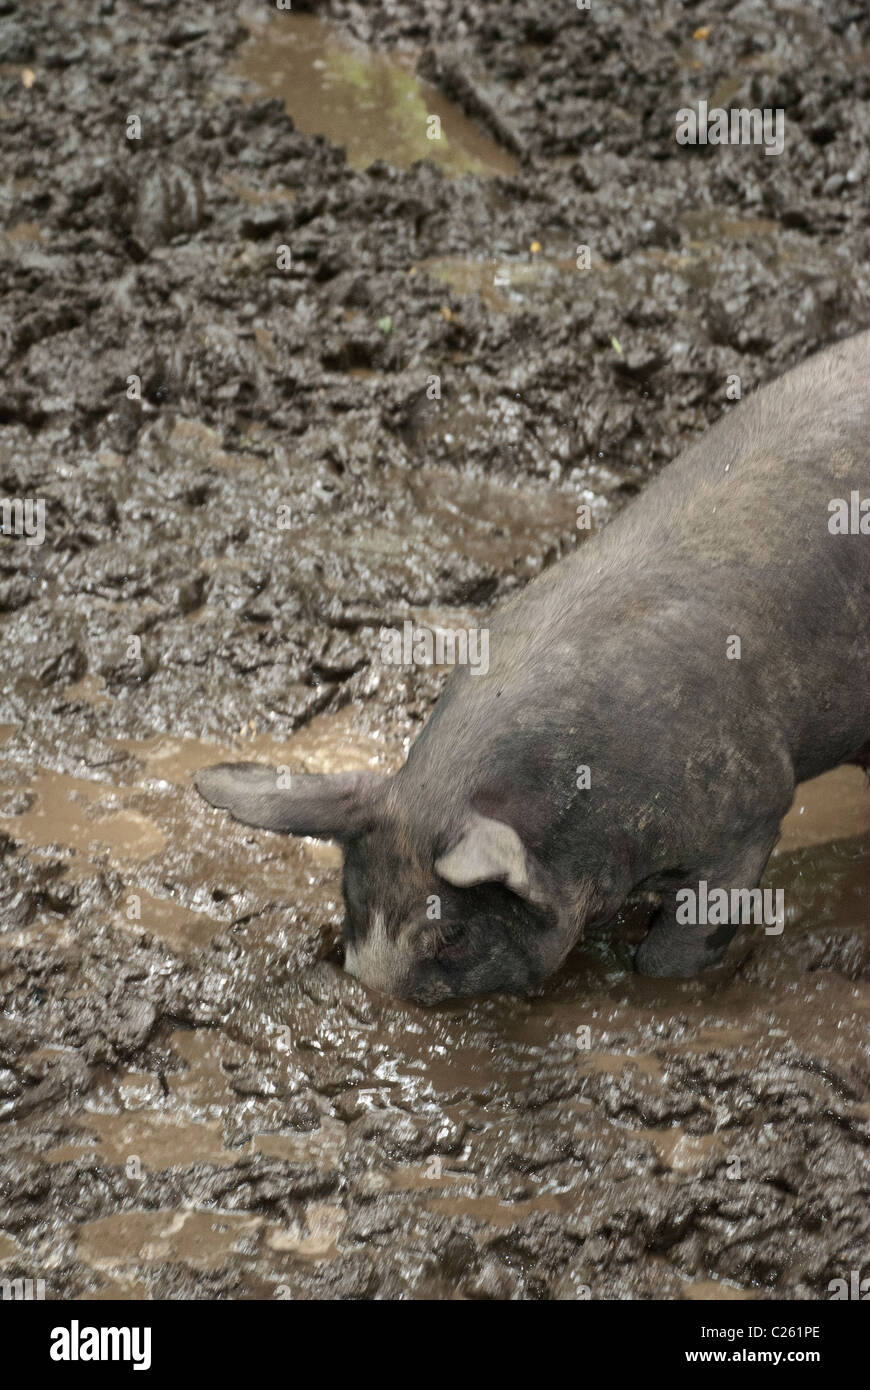 Berkshire Pig rooting in a mud wallow, Stone Barns Center for Food and Agriculture, Pocantico Hills, New York, USA Stock Photo